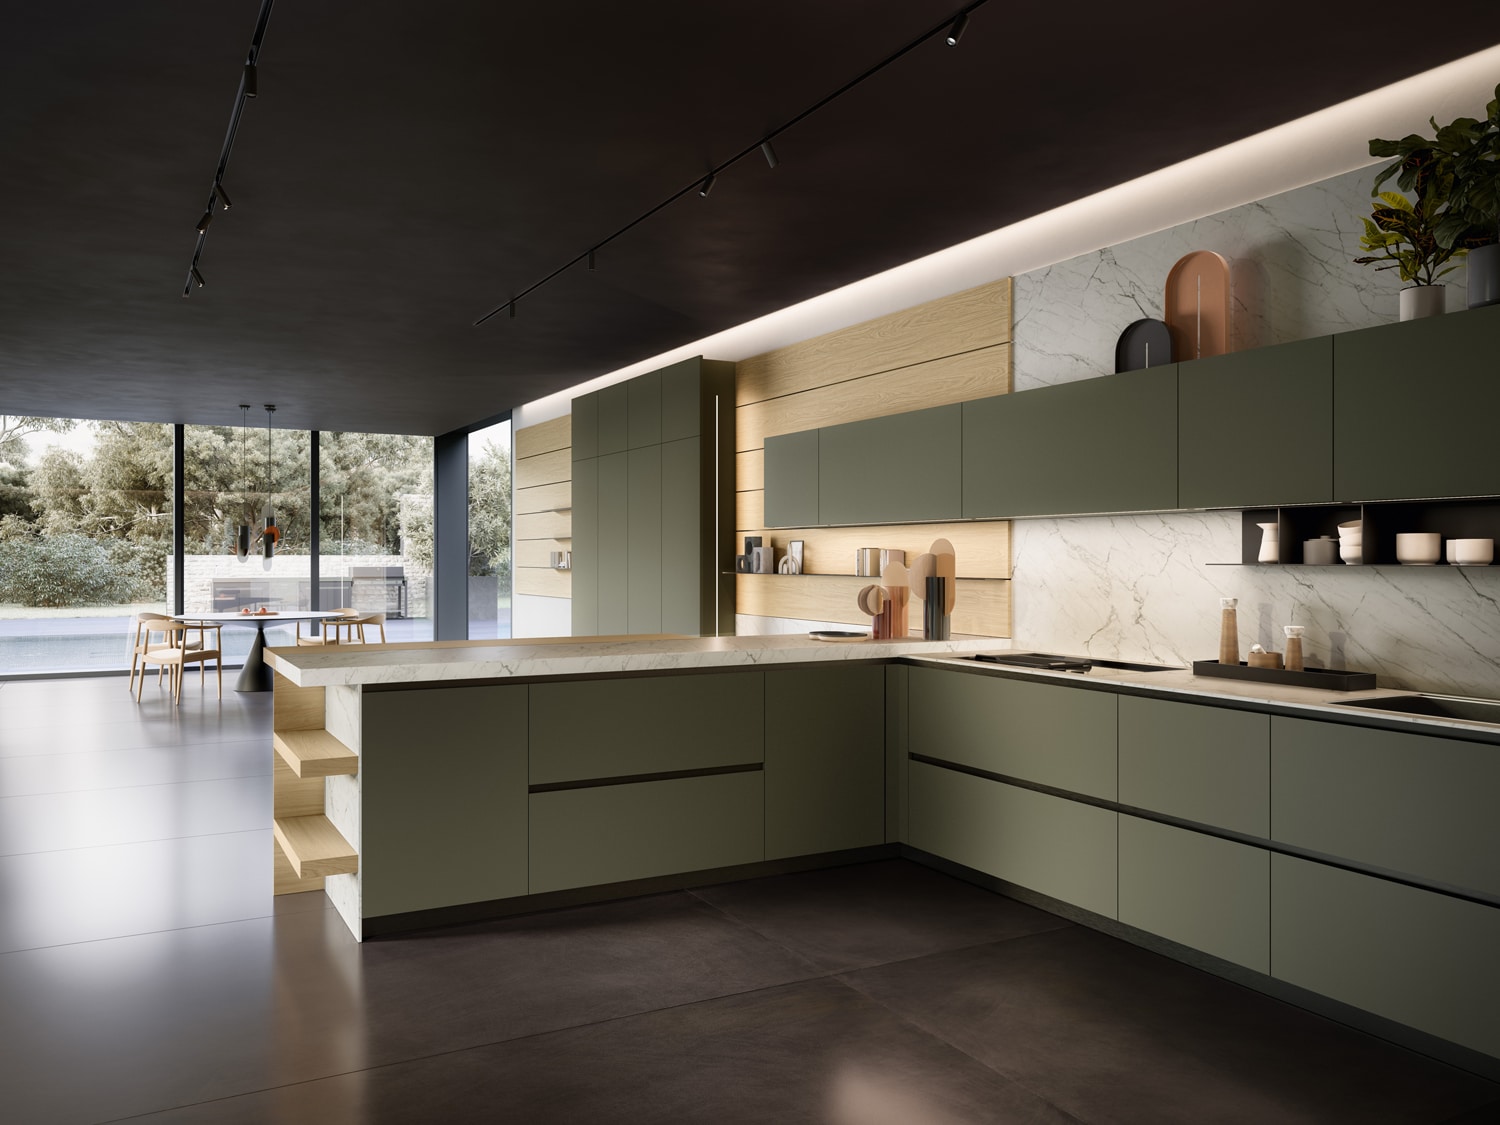 The tall columns also feature a lateral strip of LED light which illuminates the wood boiserie, enhancing its value as a sophisticated display area that connects the kitchen and the living room. 